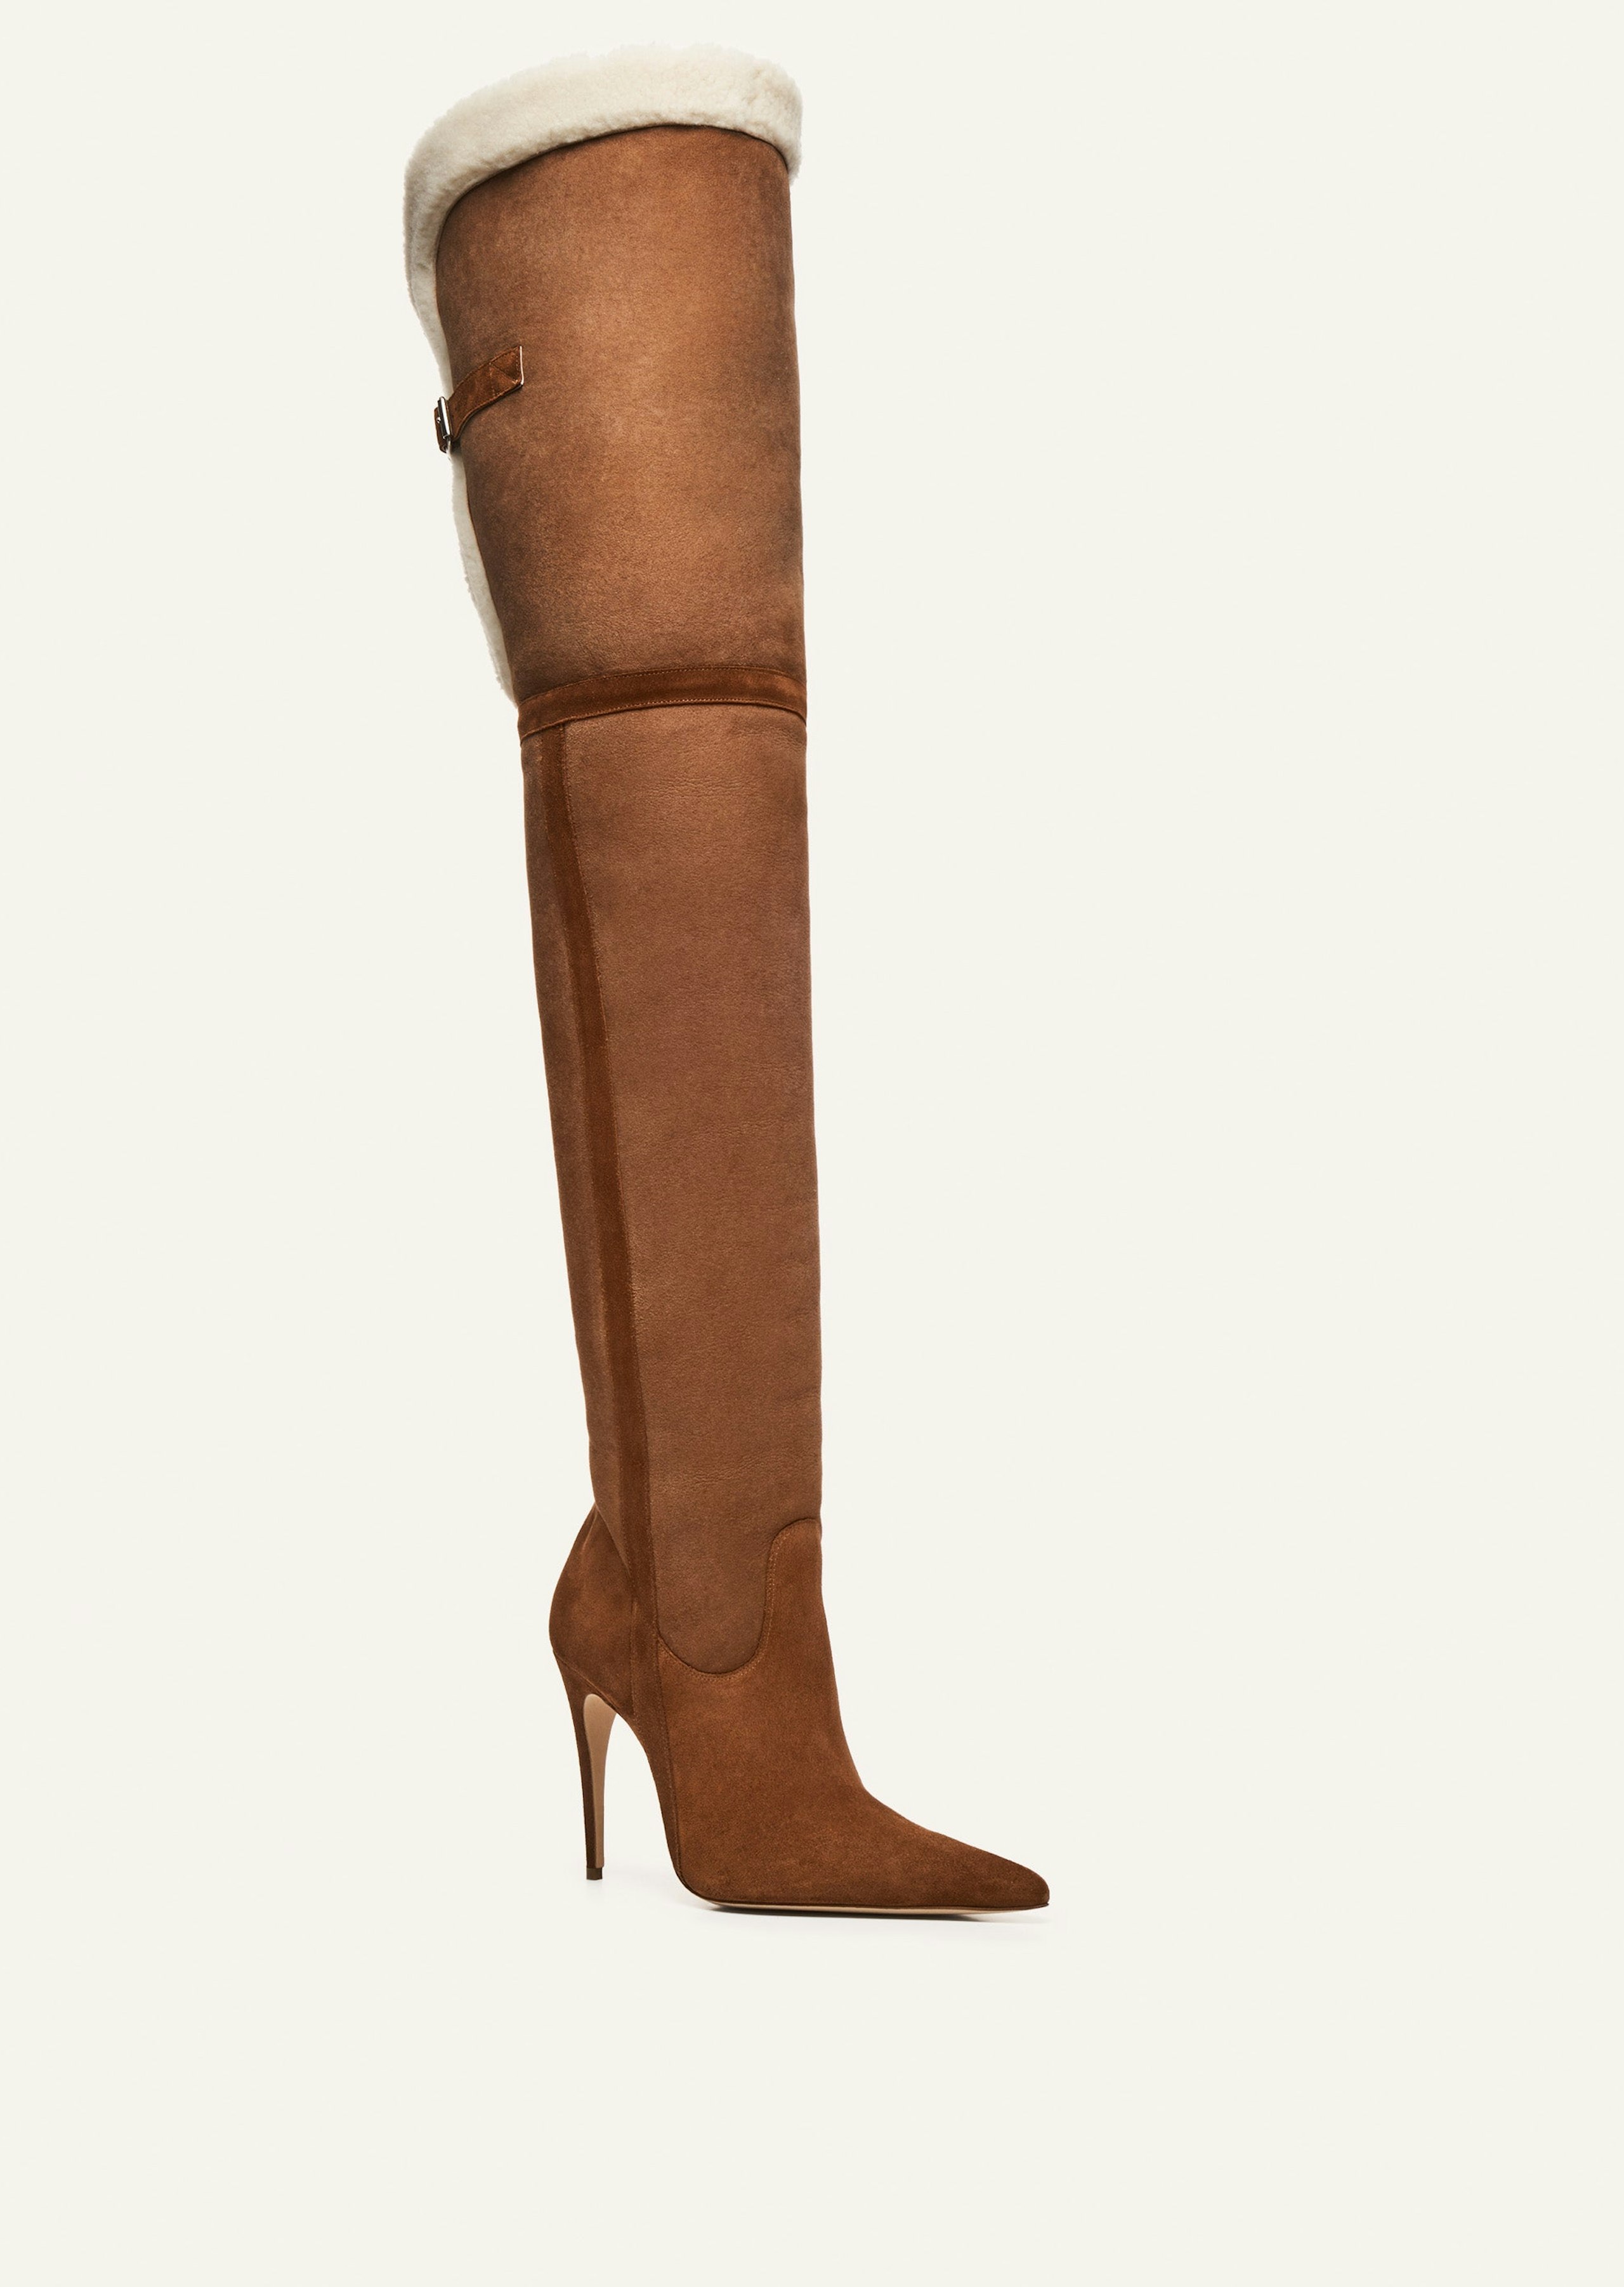 AW22 OVERKNEE BOOTS SHEARLING CREAM